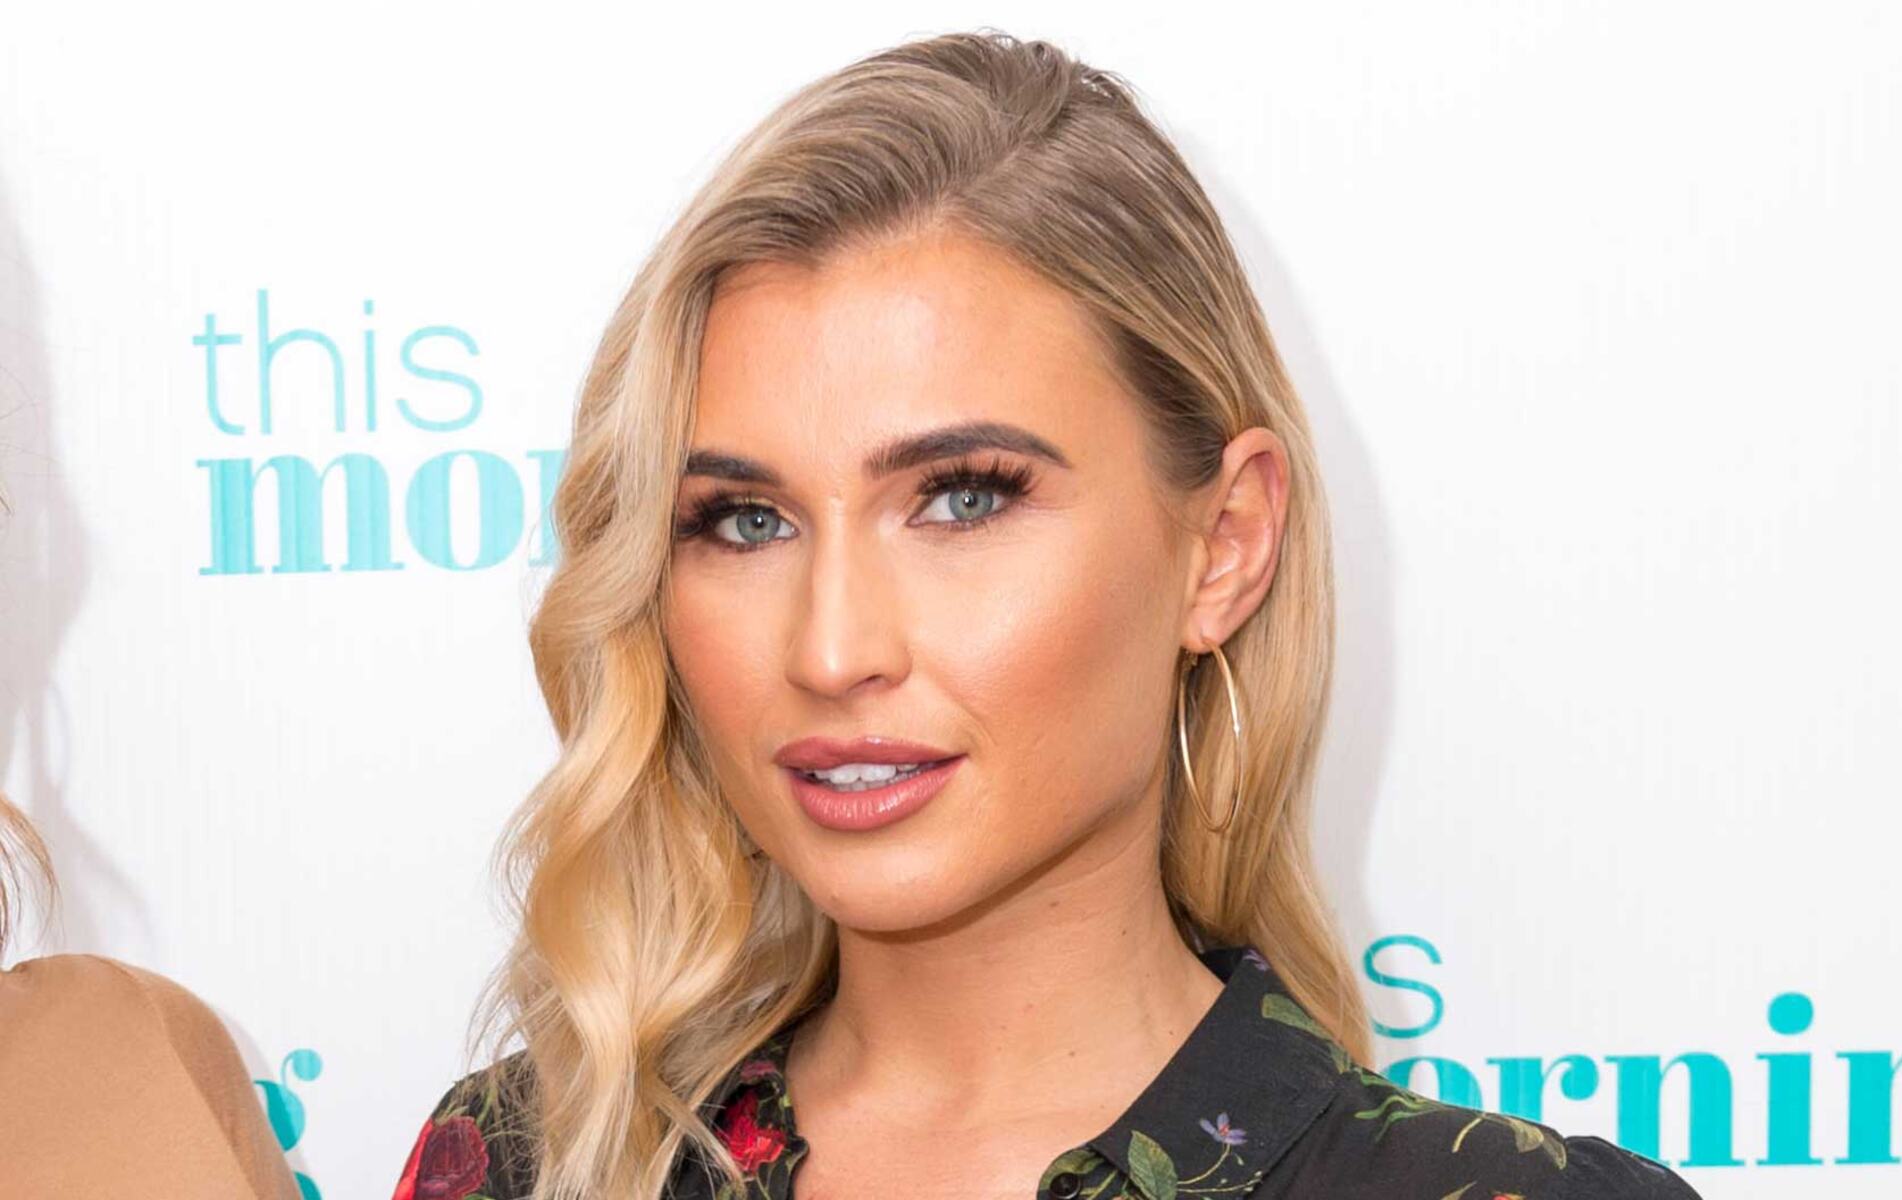 10 Mind-blowing Facts About Billie Faiers - Facts.net